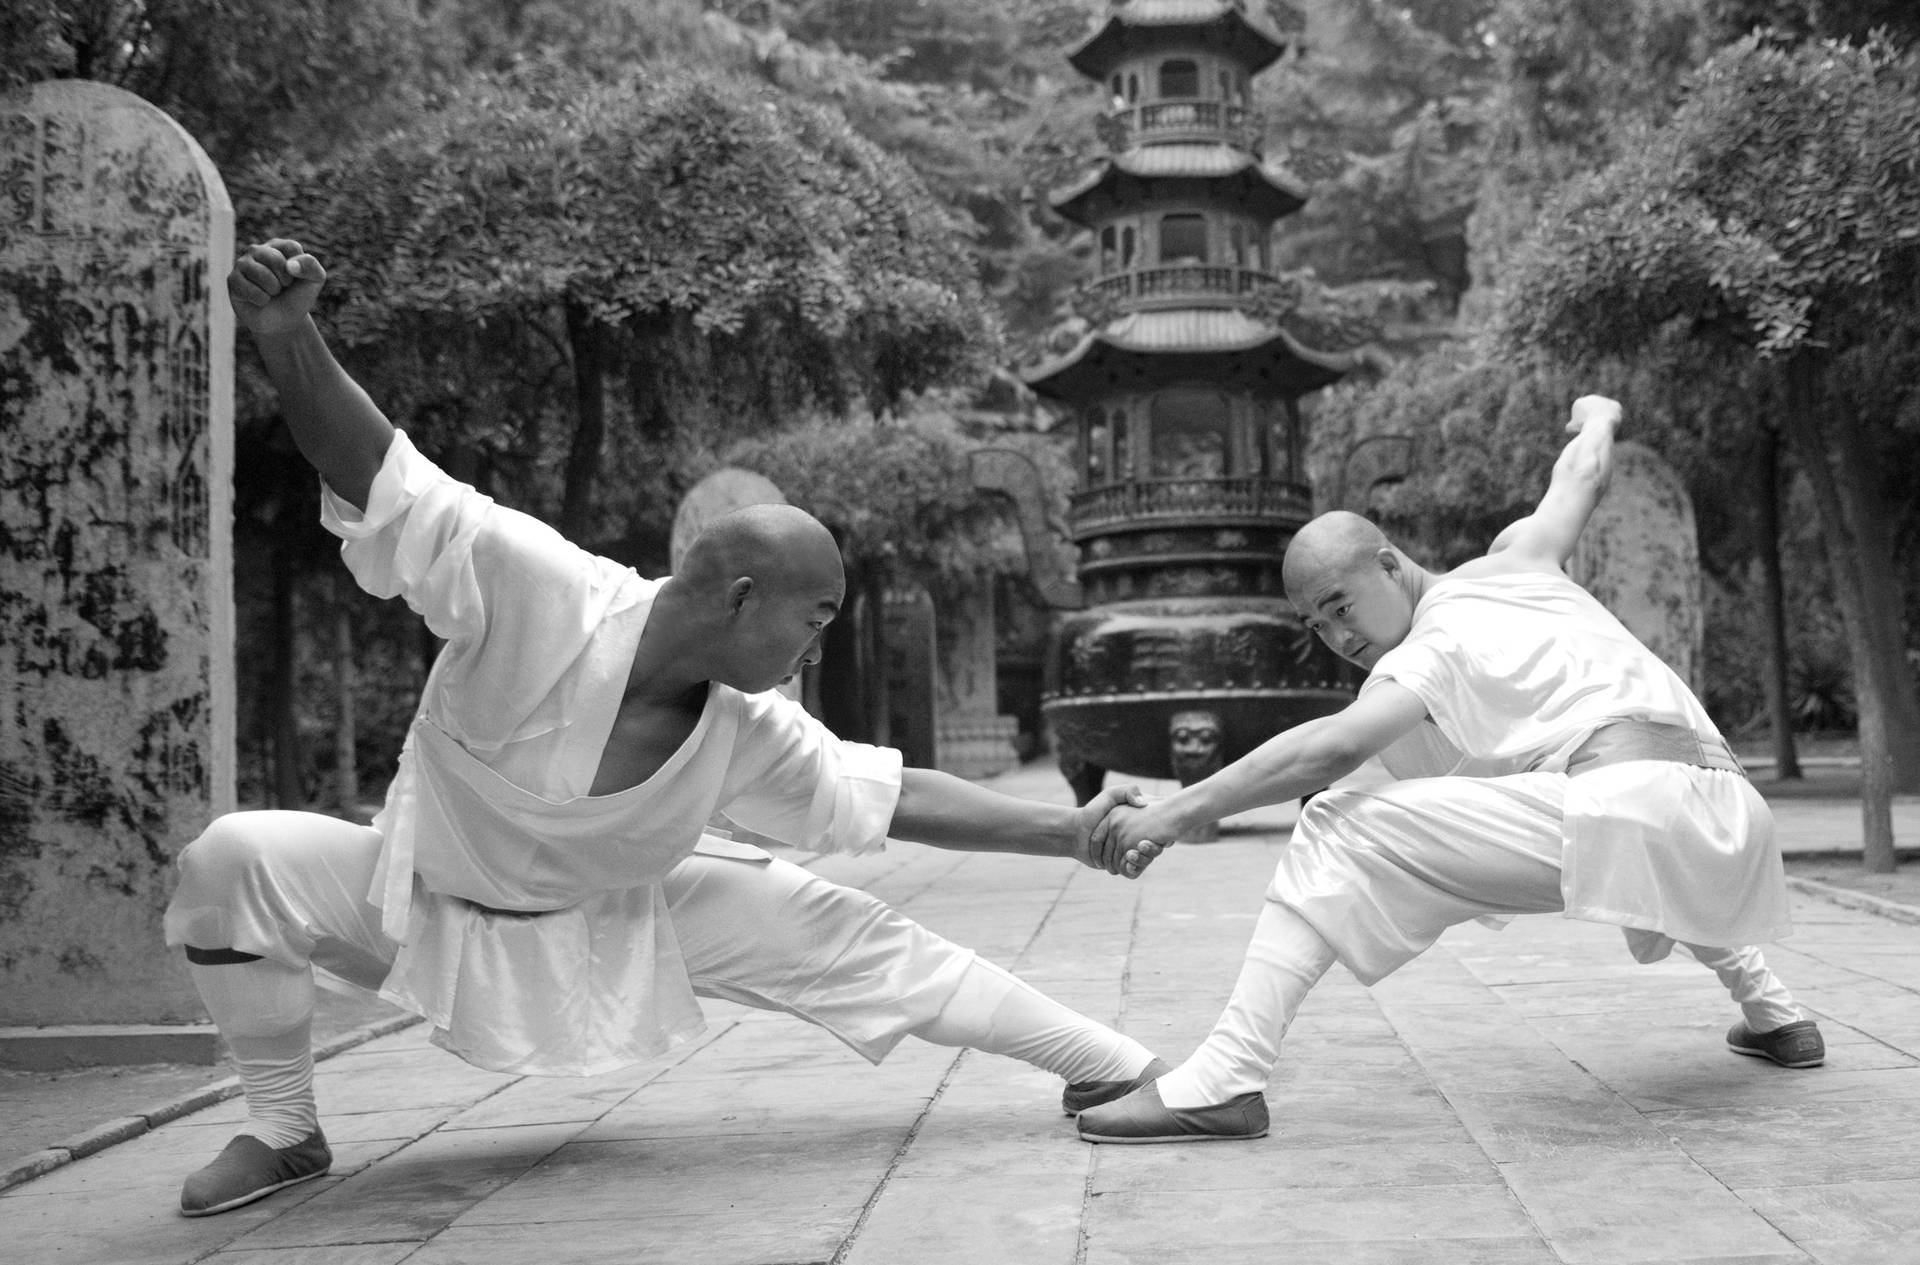 Caption: An Exemplary Display of Wing Chun at the Historic Shaolin Temple Wallpaper